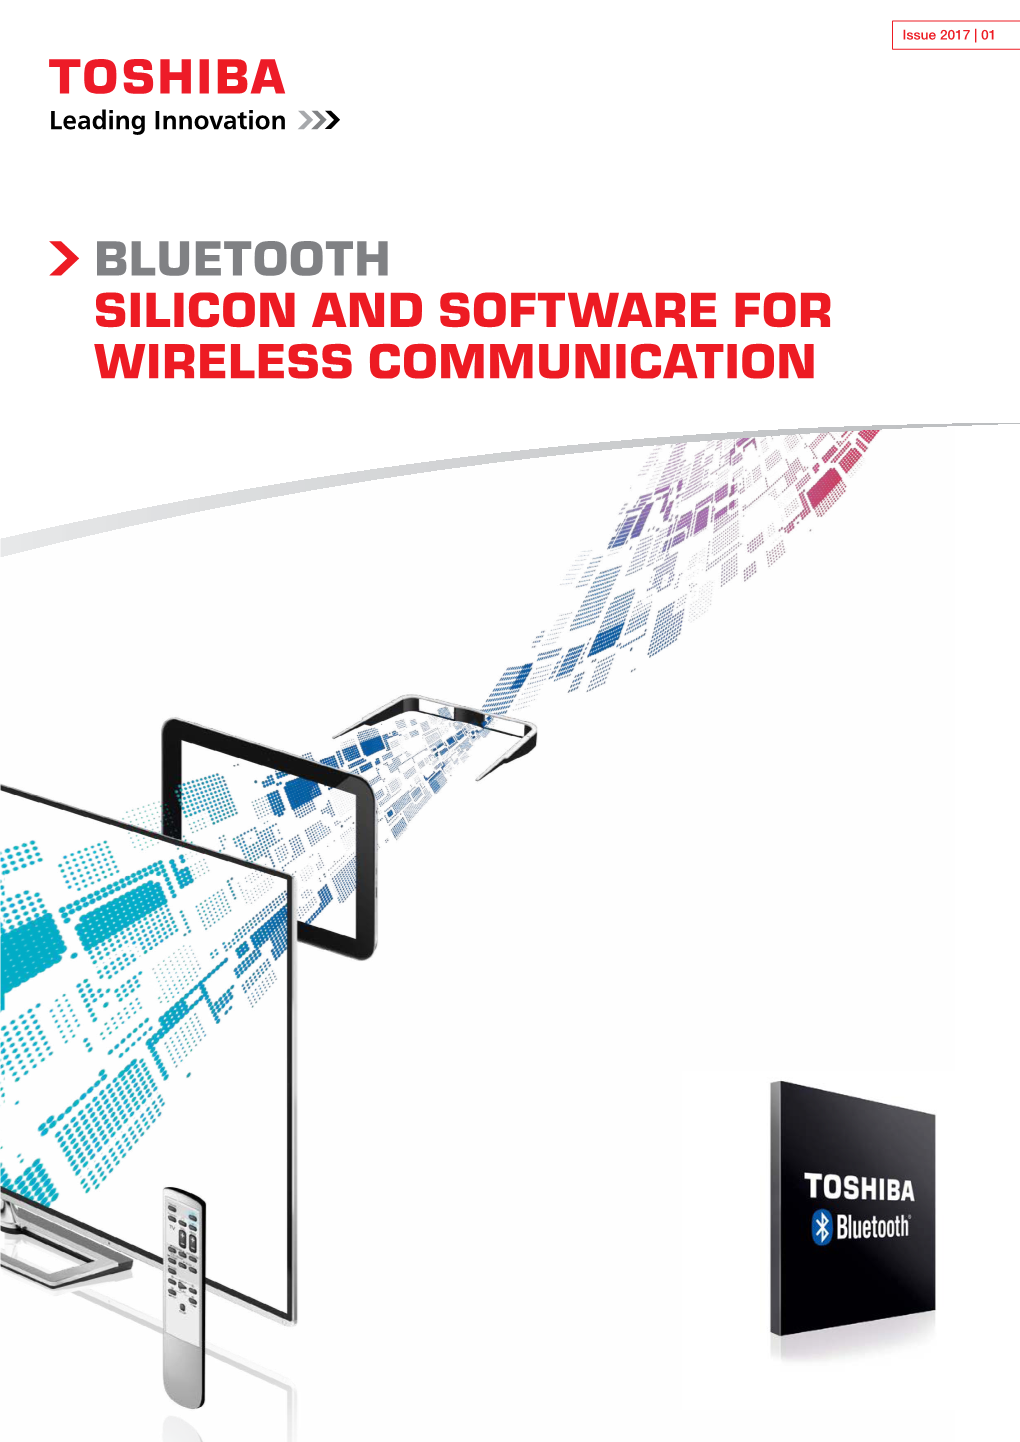 Bluetooth Silicon and Software for Wireless